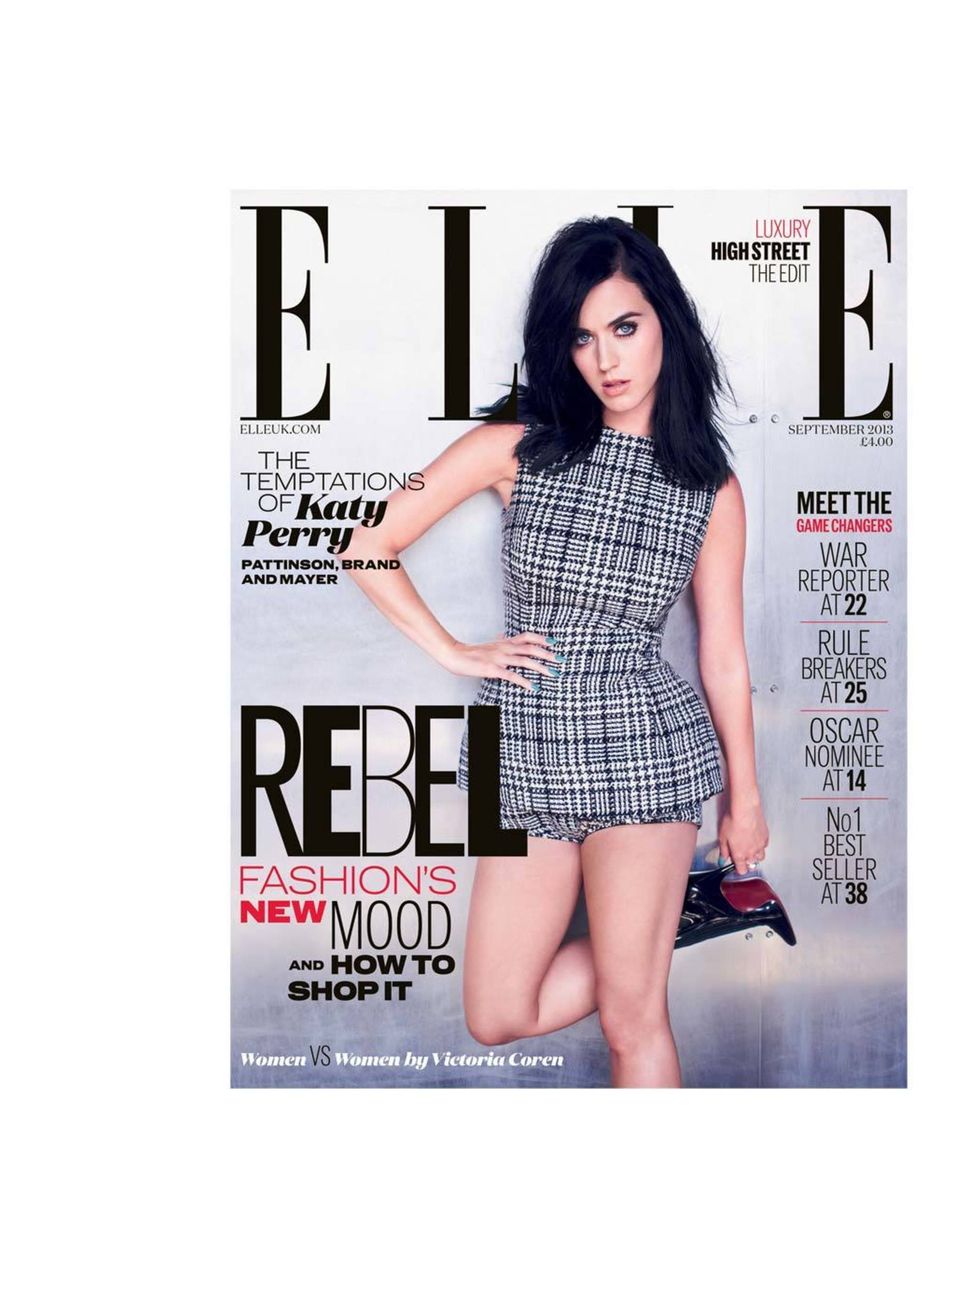 <p><a href="http://www.elleuk.com/magazine">September issue on sale Wednesday 31 July</a></p><p><em><a href="http://www.elleuk.com/elle-tv/cover-stars/elle-magazine/katy-perry-elle-behind-the-cover-video">See Katys behind-the-scenes cover shoot video her